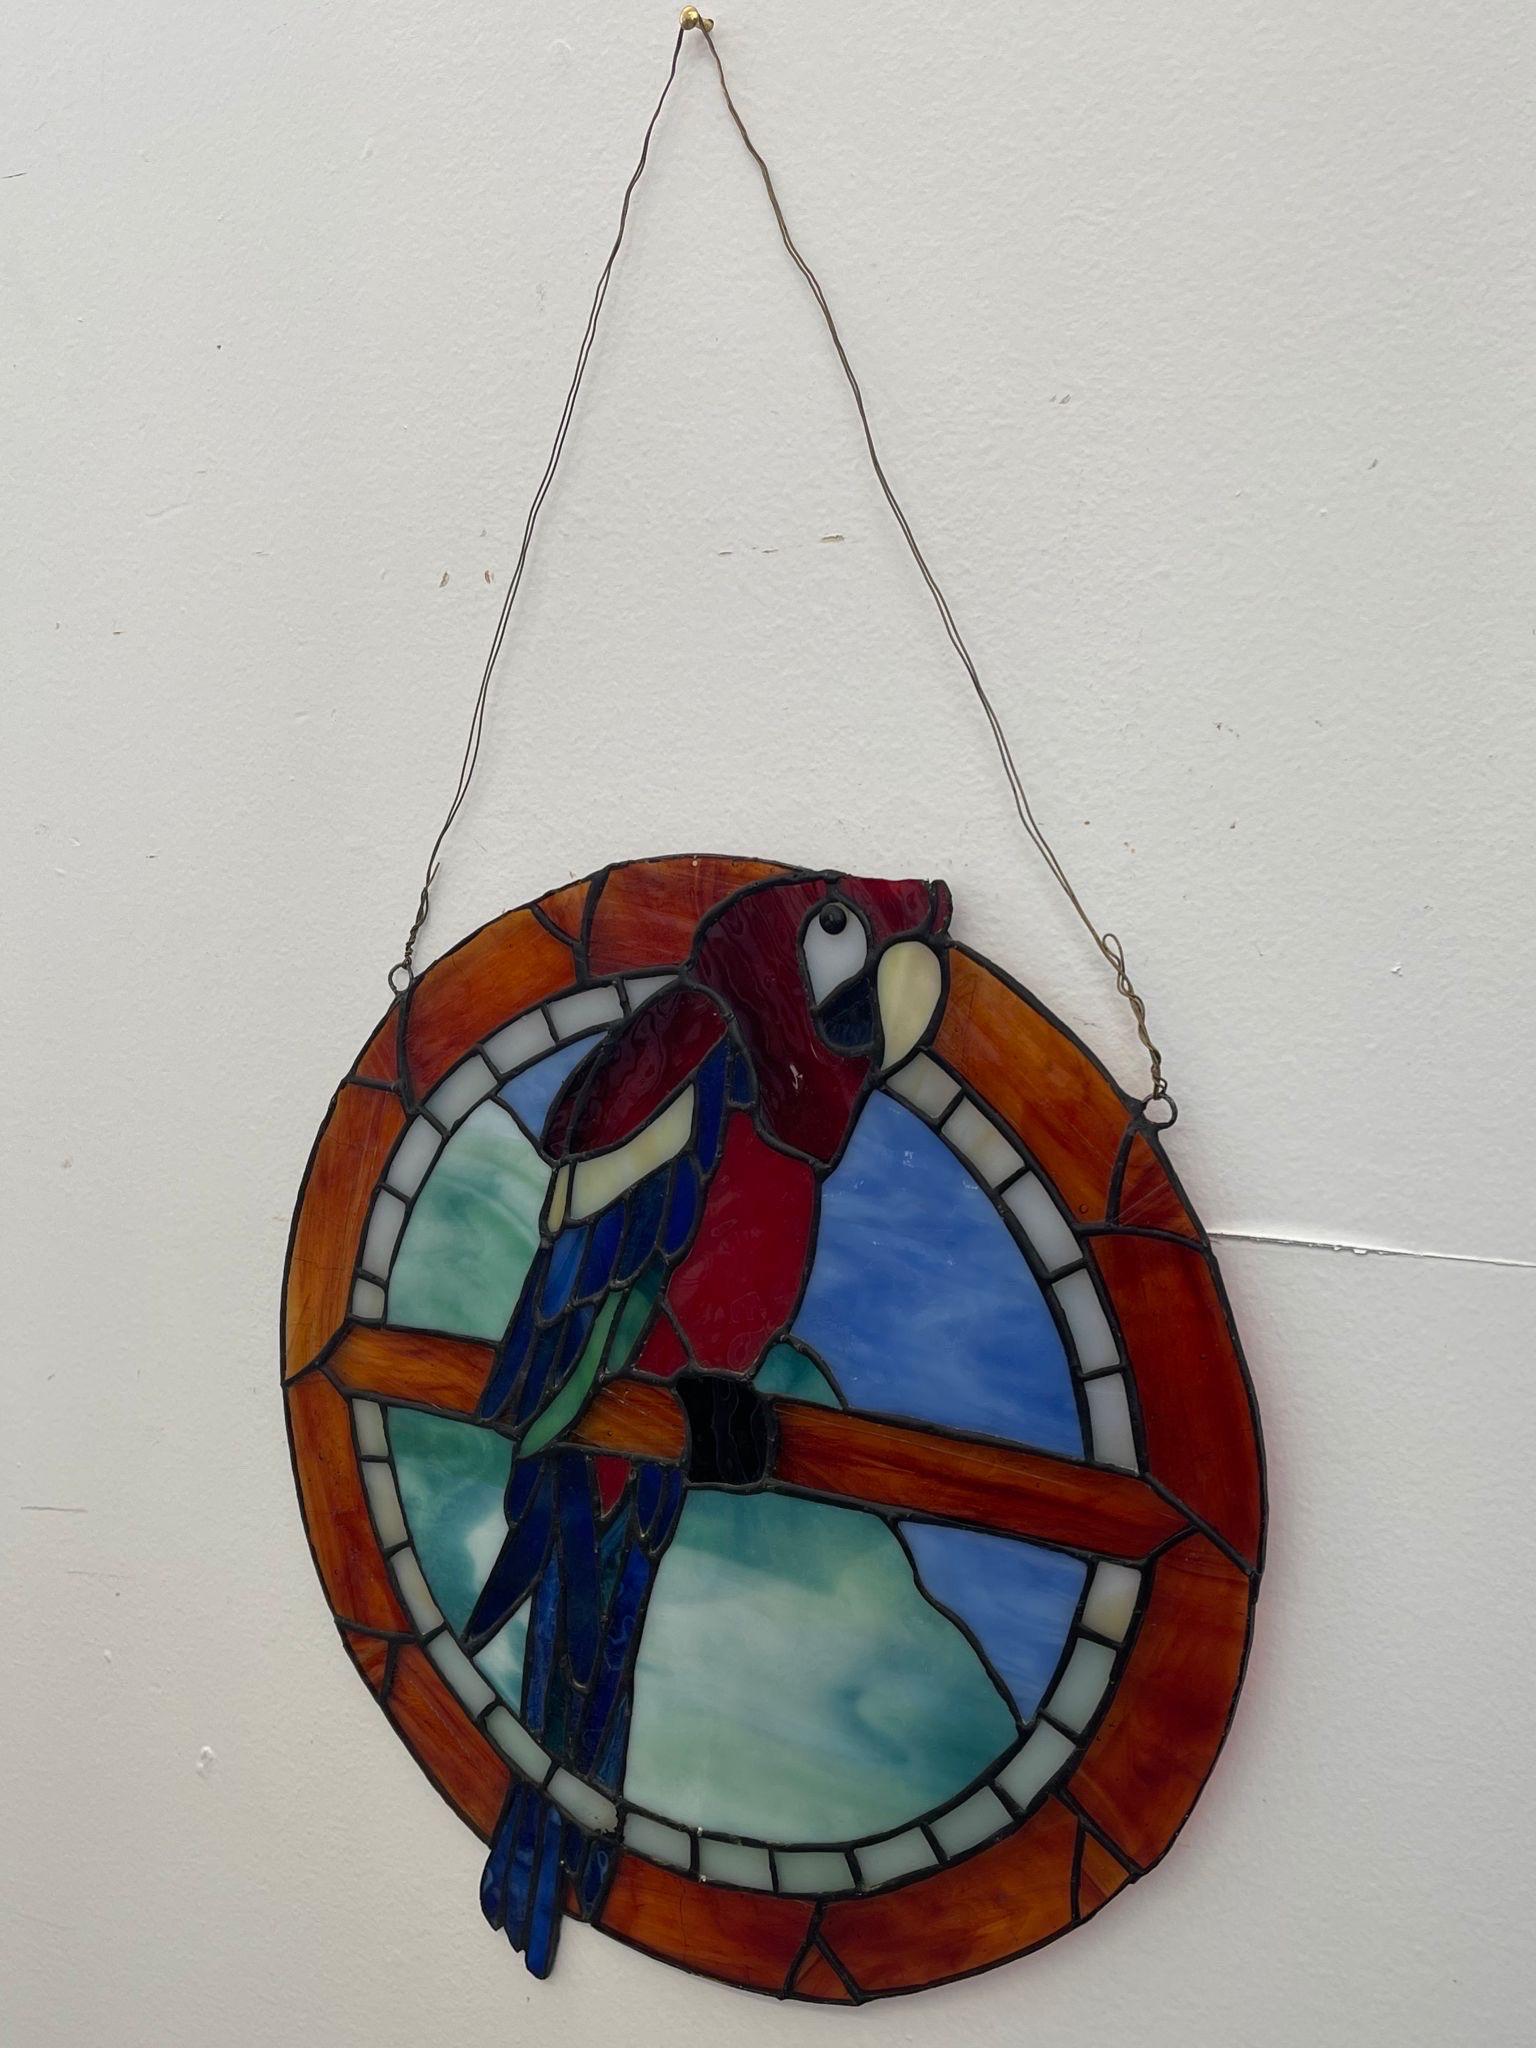 Stained Glass Handmade artwork of blue and red parrot. Wire attached for hanging. Vintage Condition Consistent with Age as Pictured.

Dimensions. 12 W ; 1/4 D ; 13 1/2 H